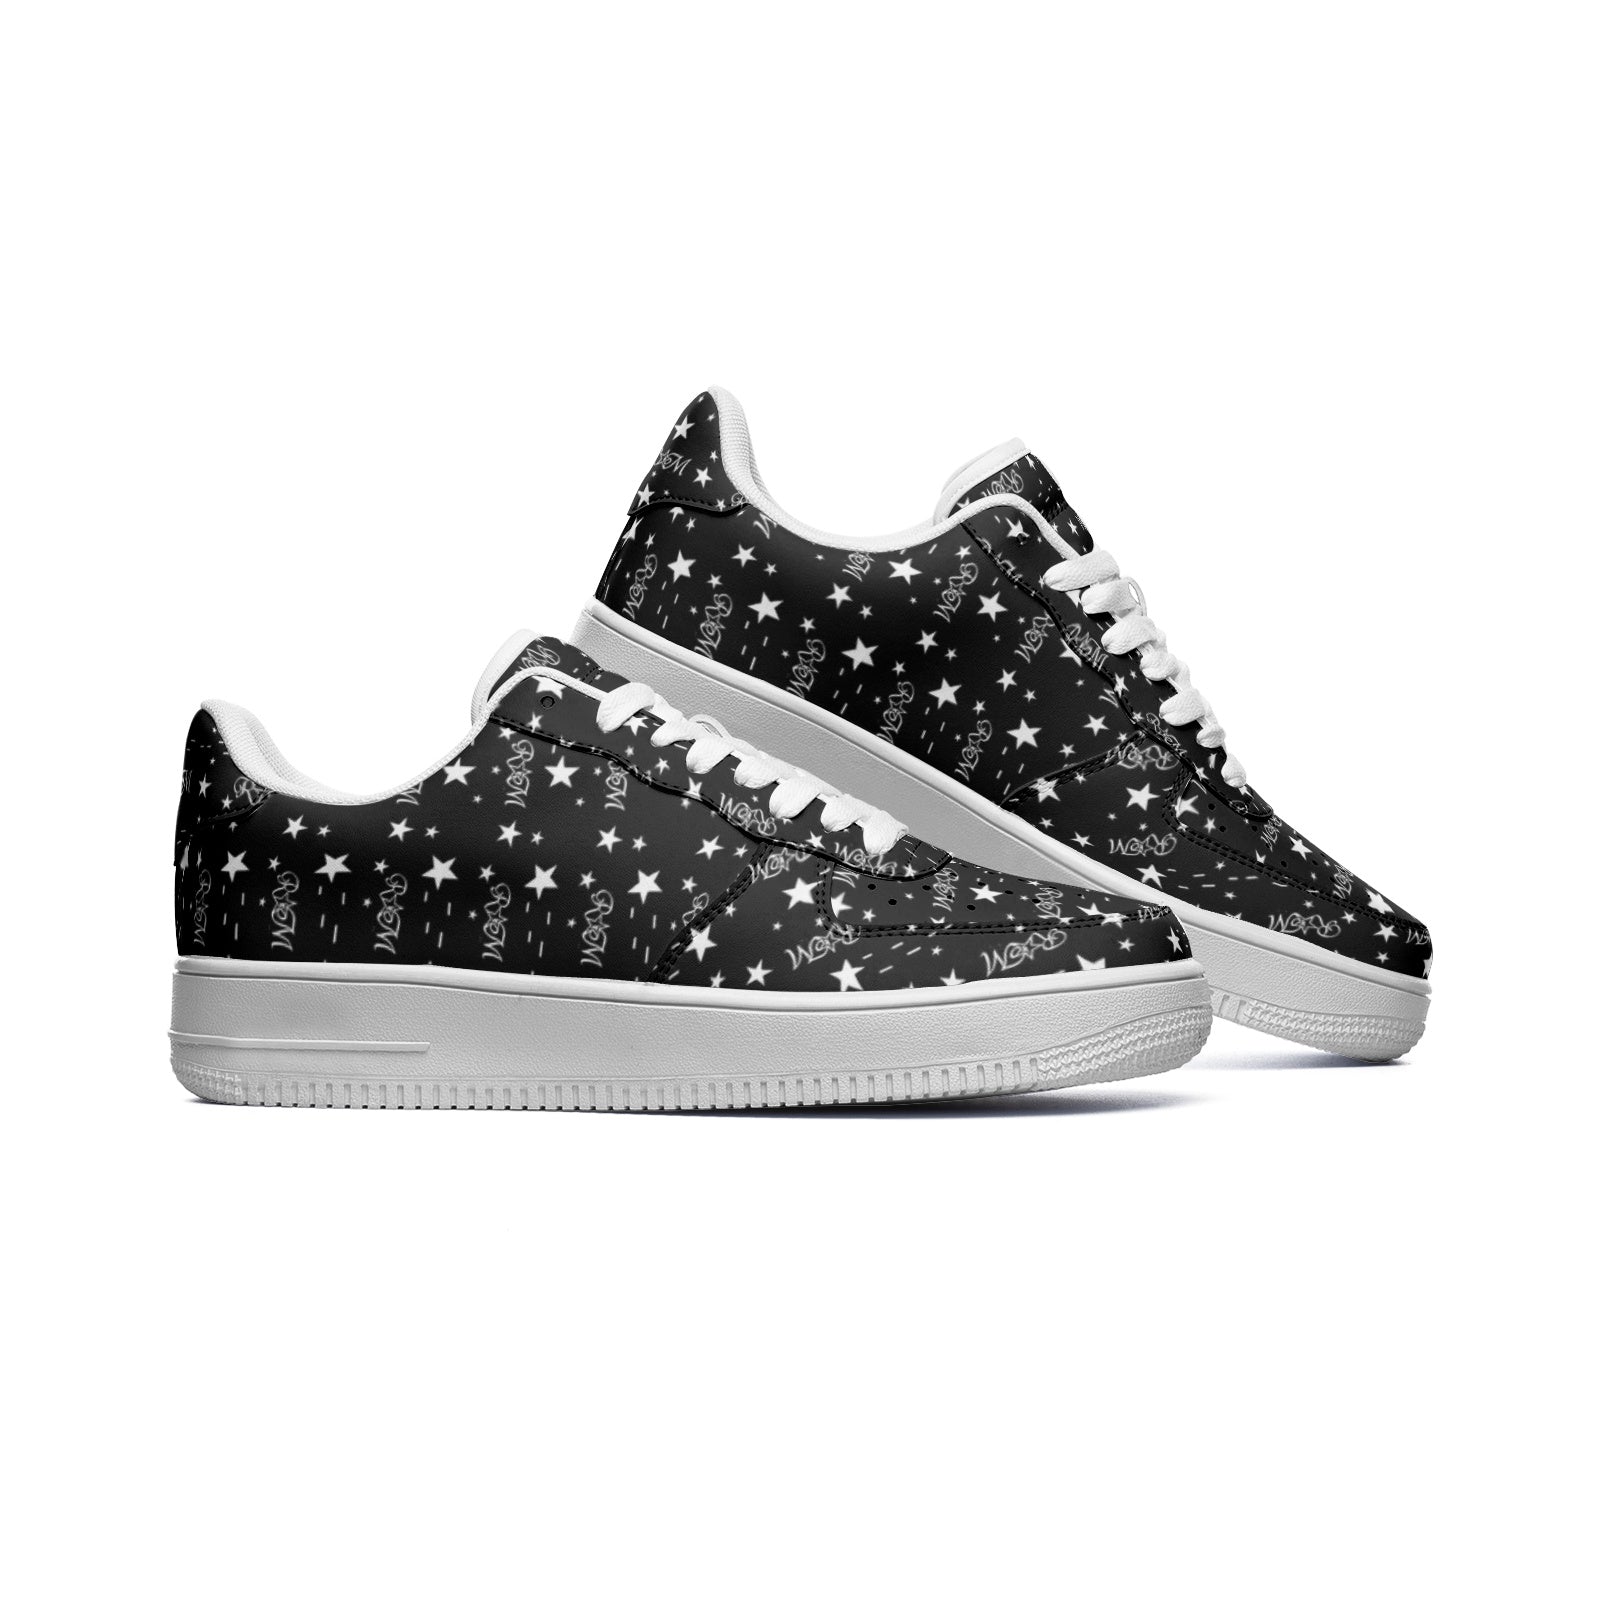 RM Style X  Unisex Limited Low Top Sneakers